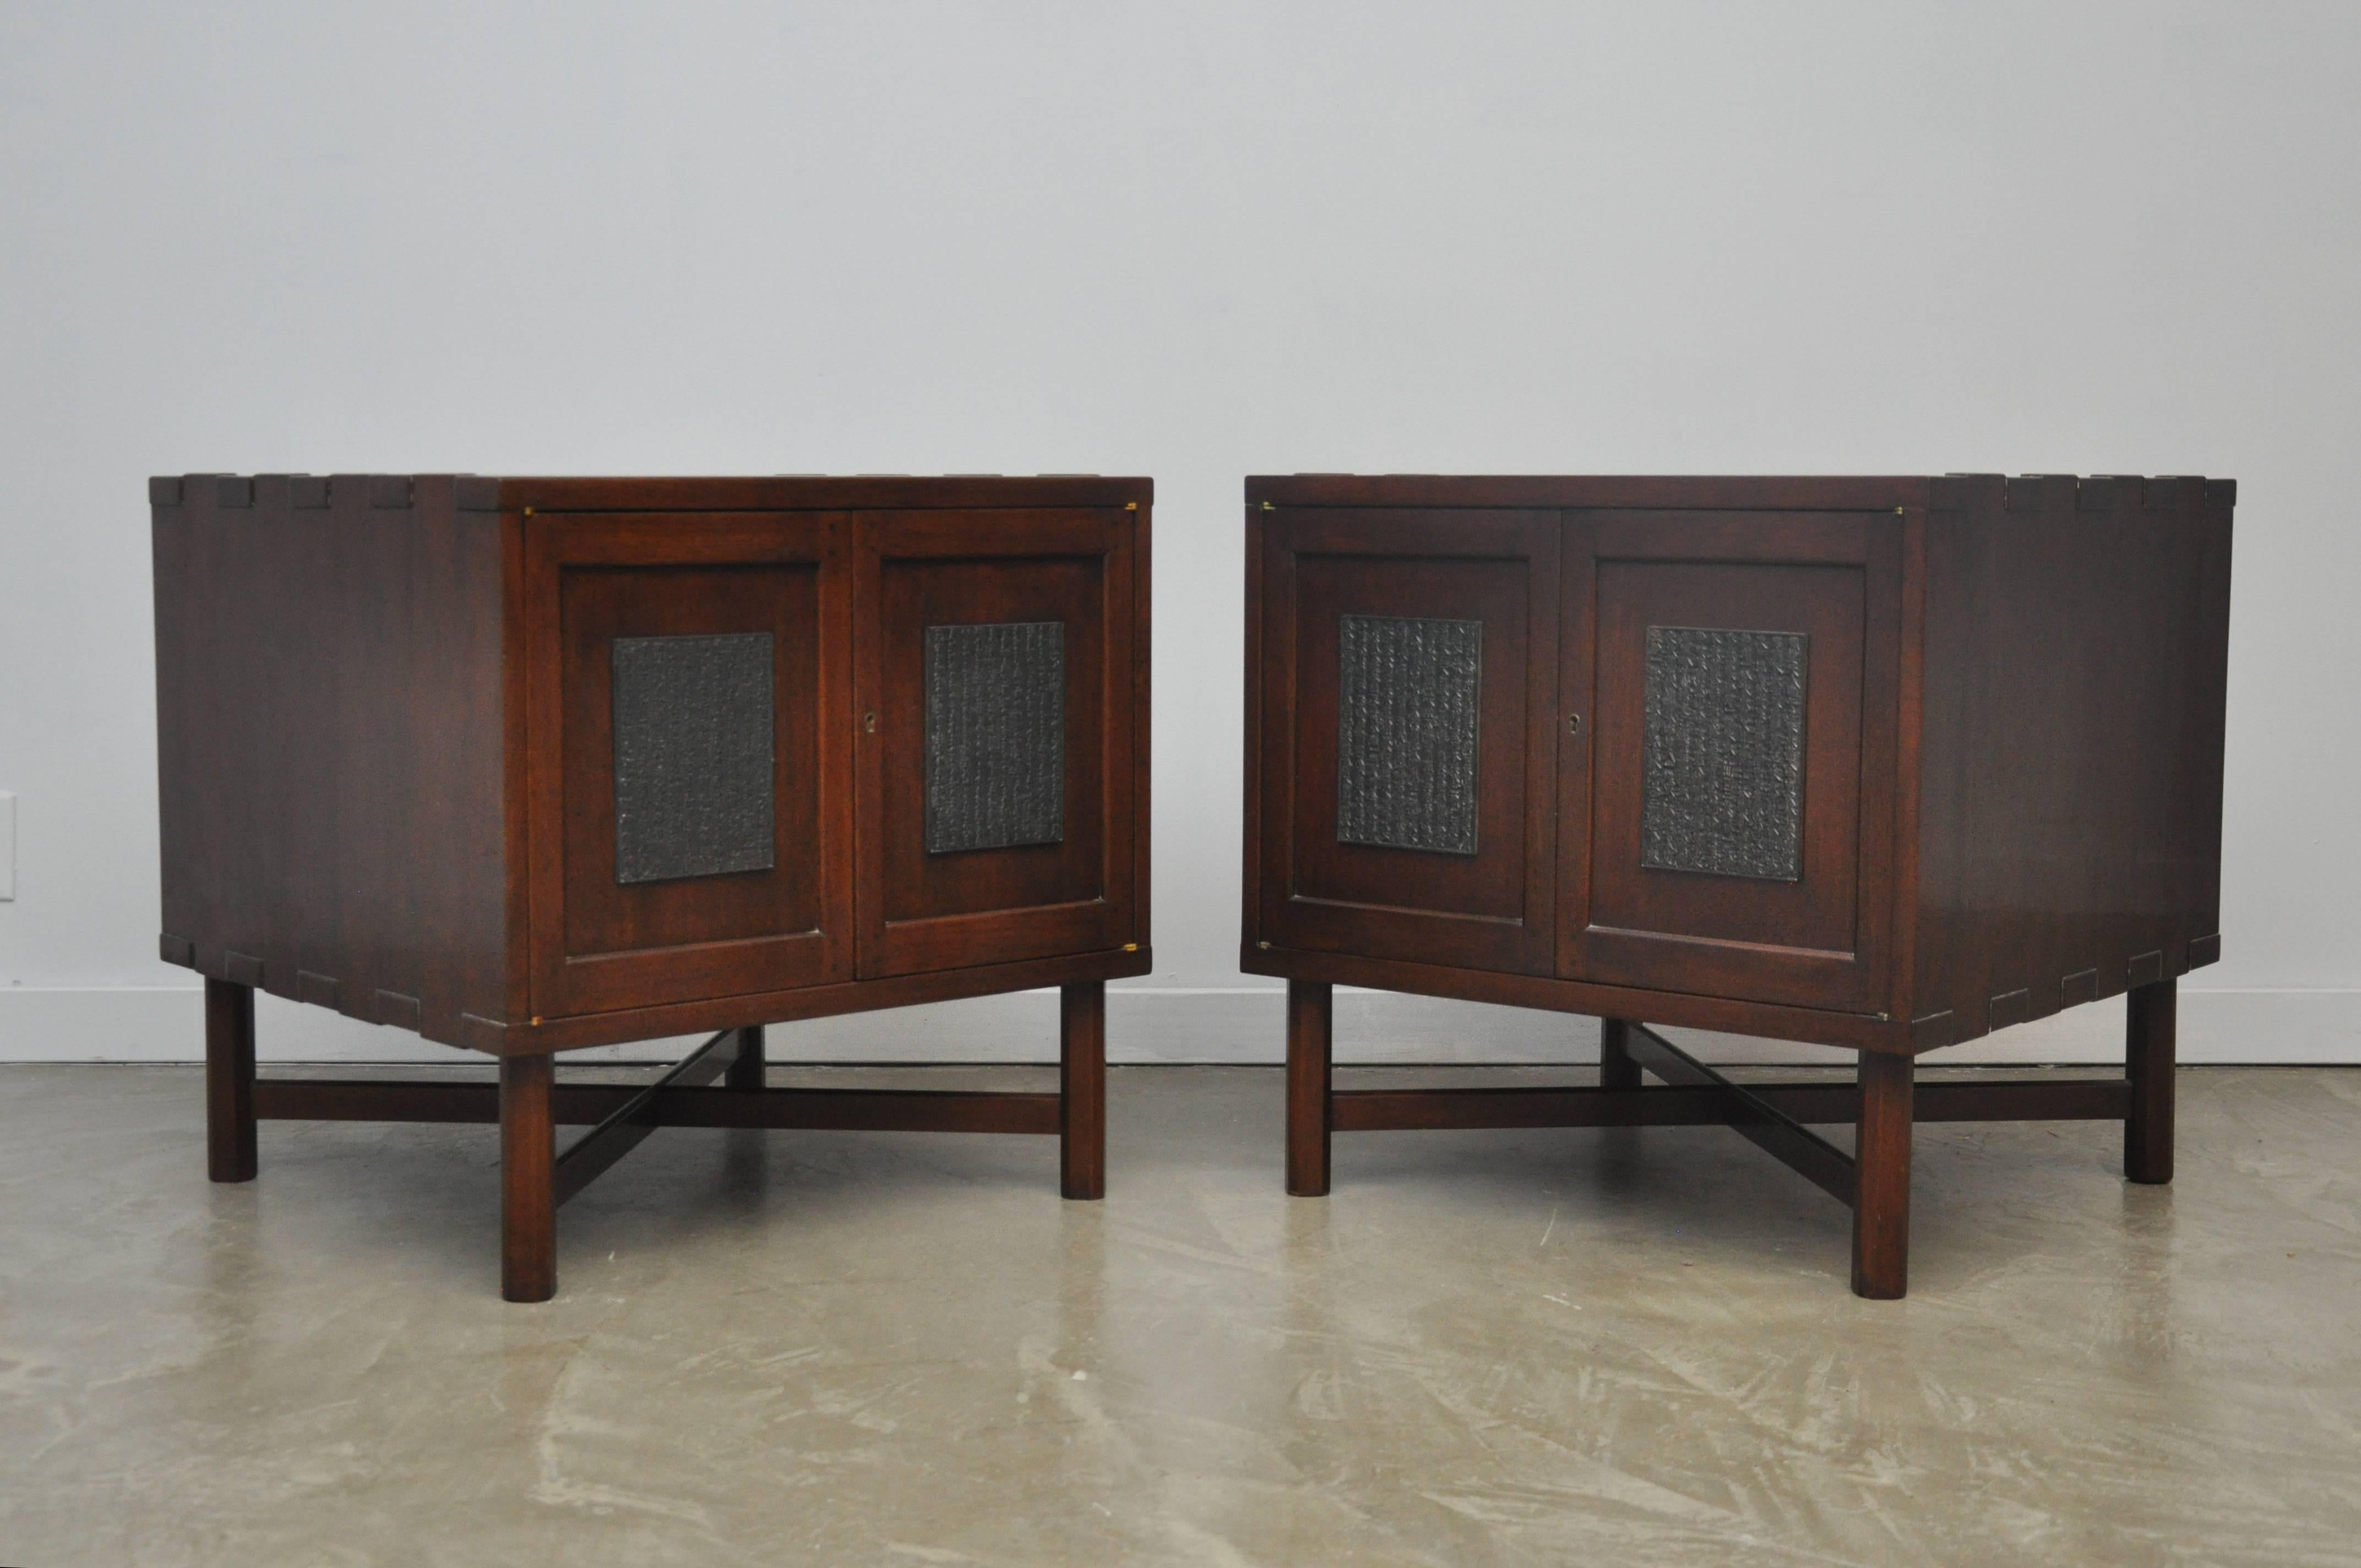 20th Century Rare Nightstand Chests by Edward Wormley for Dunbar